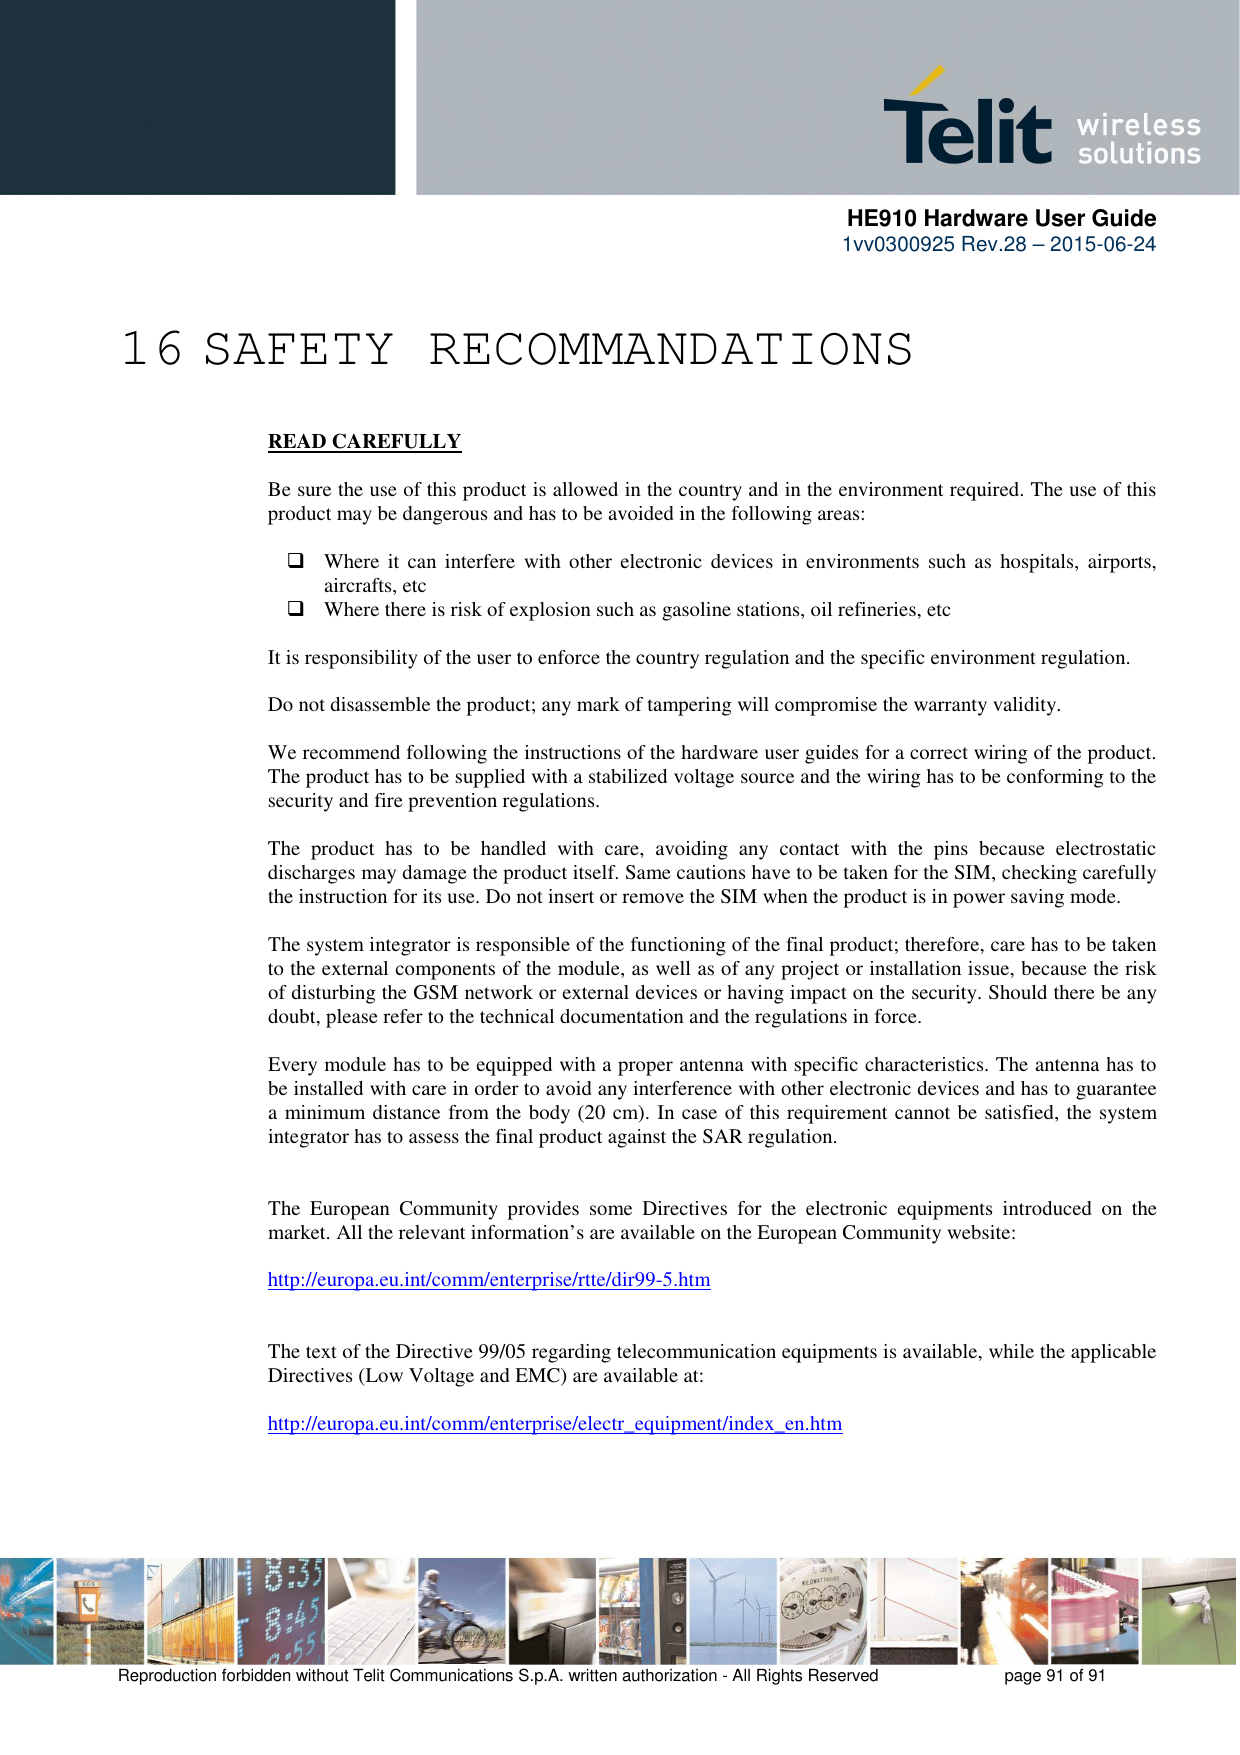      HE910 Hardware User Guide 1vv0300925 Rev.28 – 2015-06-24    Reproduction forbidden without Telit Communications S.p.A. written authorization - All Rights Reserved    page 91 of 91   16 SAFETY RECOMMANDATIONS READ CAREFULLY  Be sure the use of this product is allowed in the country and in the environment required. The use of this product may be dangerous and has to be avoided in the following areas:   Where  it  can  interfere  with other  electronic  devices  in  environments  such  as  hospitals,  airports, aircrafts, etc  Where there is risk of explosion such as gasoline stations, oil refineries, etc   It is responsibility of the user to enforce the country regulation and the specific environment regulation.  Do not disassemble the product; any mark of tampering will compromise the warranty validity.  We recommend following the instructions of the hardware user guides for a correct wiring of the product. The product has to be supplied with a stabilized voltage source and the wiring has to be conforming to the security and fire prevention regulations.  The  product  has  to  be  handled  with  care,  avoiding  any  contact  with  the  pins  because  electrostatic discharges may damage the product itself. Same cautions have to be taken for the SIM, checking carefully the instruction for its use. Do not insert or remove the SIM when the product is in power saving mode.  The system integrator is responsible of the functioning of the final product; therefore, care has to be taken to the external components of the module, as well as of any project or installation issue, because the risk of disturbing the GSM network or external devices or having impact on the security. Should there be any doubt, please refer to the technical documentation and the regulations in force.  Every module has to be equipped with a proper antenna with specific characteristics. The antenna has to be installed with care in order to avoid any interference with other electronic devices and has to guarantee a minimum distance from the body (20 cm). In case of this requirement cannot be satisfied, the system integrator has to assess the final product against the SAR regulation.   The  European  Community  provides  some  Directives  for  the  electronic  equipments  introduced  on  the market. All the relevant information’s are available on the European Community website:  http://europa.eu.int/comm/enterprise/rtte/dir99-5.htm     The text of the Directive 99/05 regarding telecommunication equipments is available, while the applicable Directives (Low Voltage and EMC) are available at:  http://europa.eu.int/comm/enterprise/electr_equipment/index_en.htm  